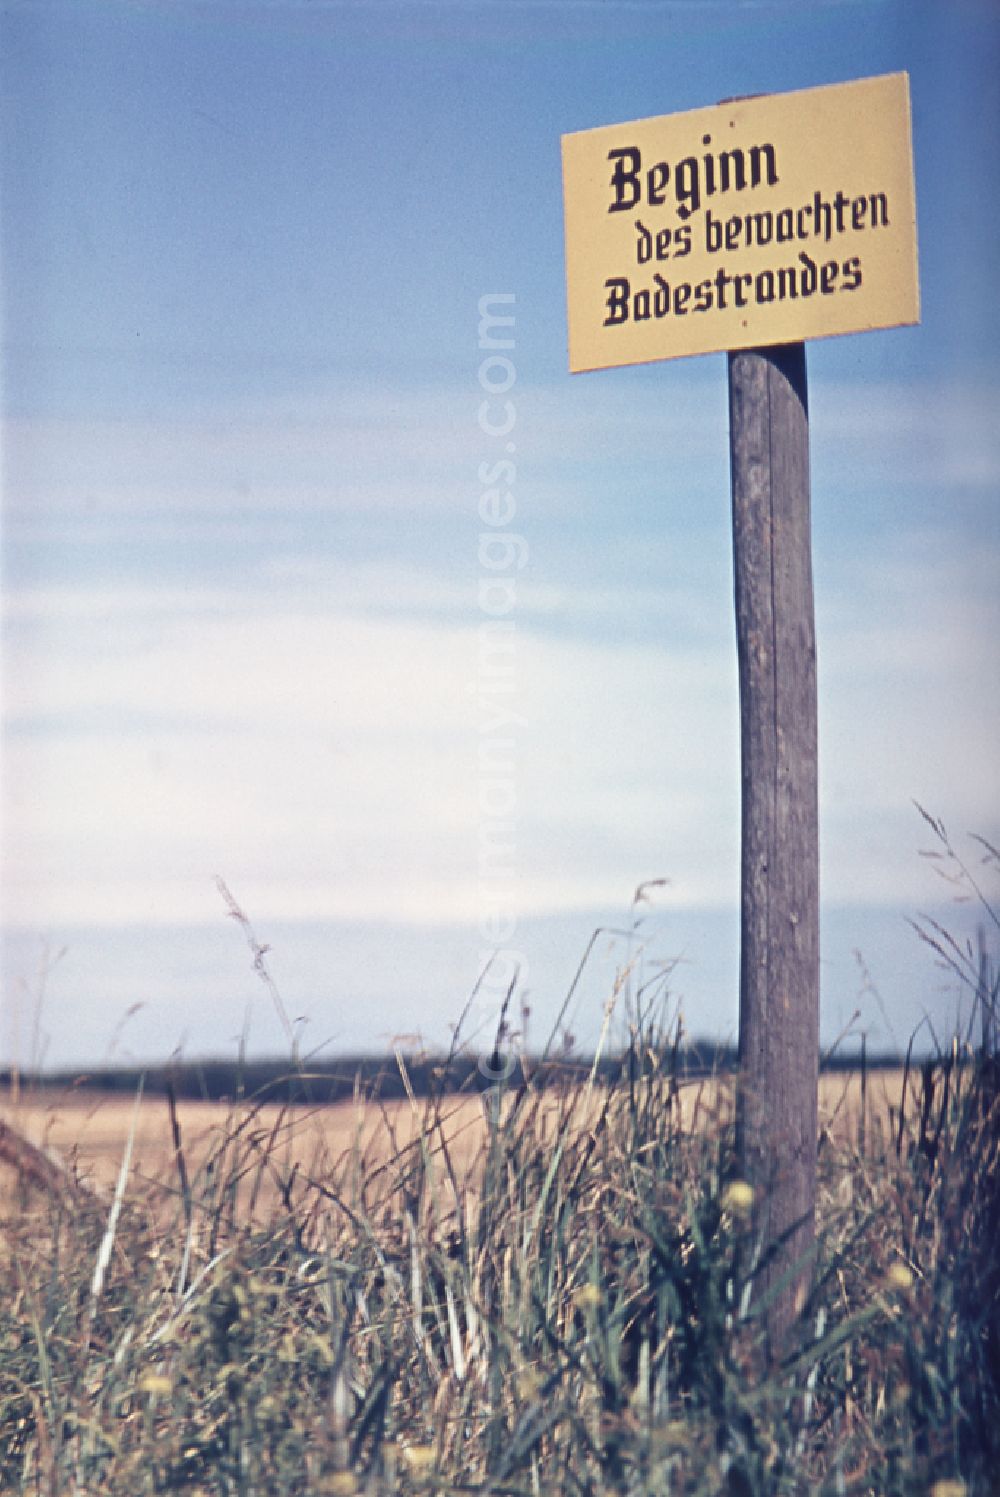 GDR picture archive: Born a. Darß - Warning of a sign Start of the guarded bathing beach in Born a. Darss, Mecklenburg-Western Pomerania in the territory of the former GDR, German Democratic Republic